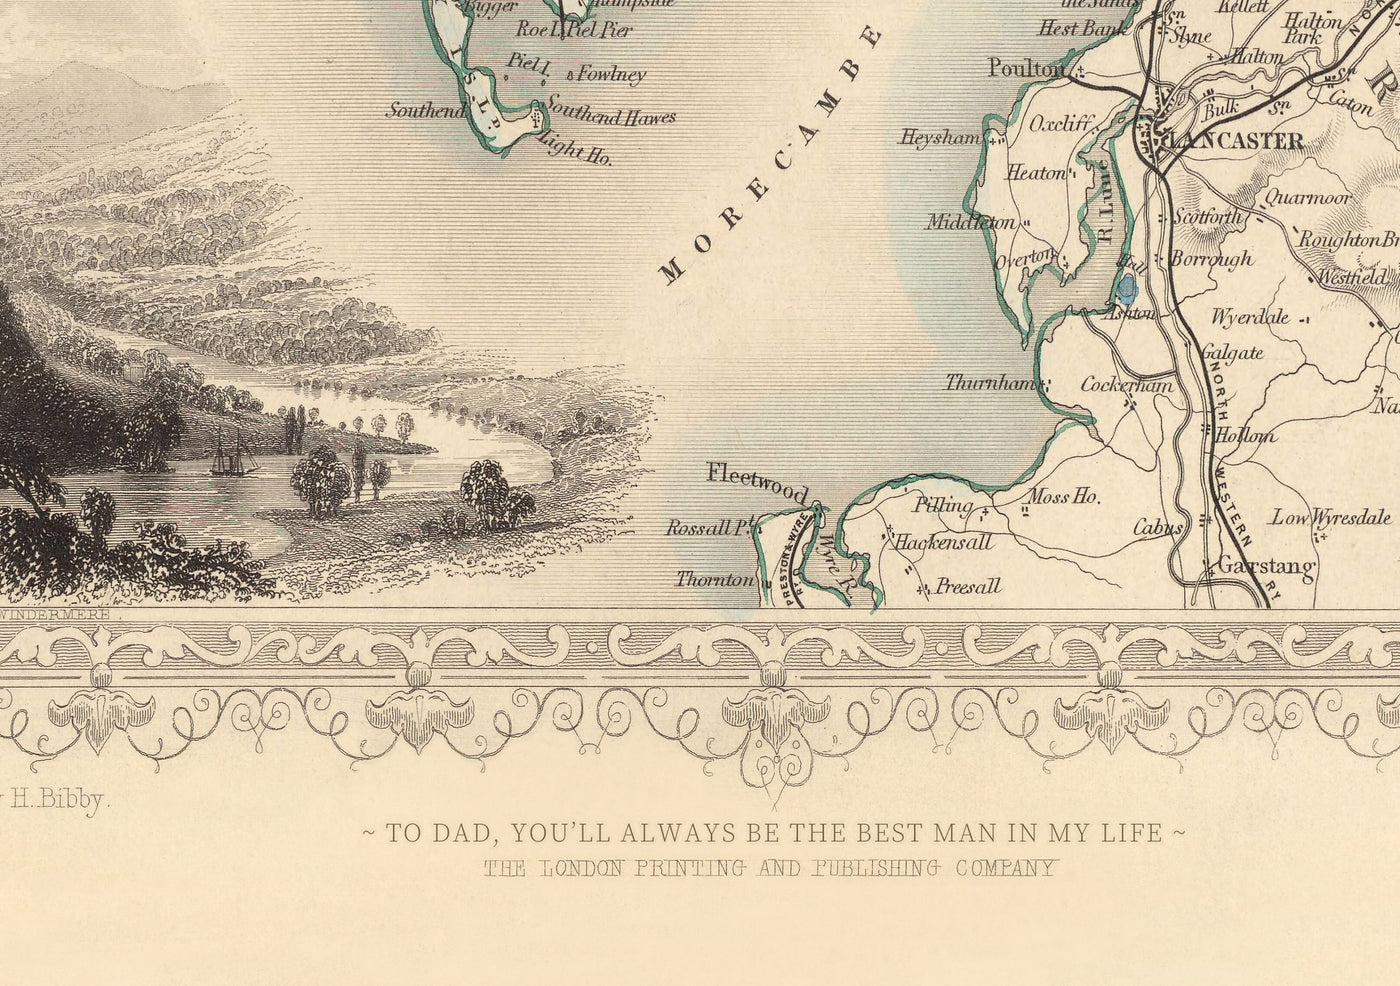 Old Map of Suffolk in 1844 by Samuel Lewis - Ipswich, Woodbridge, Bury St. Edmunds, Thetford, Great Yarmouth